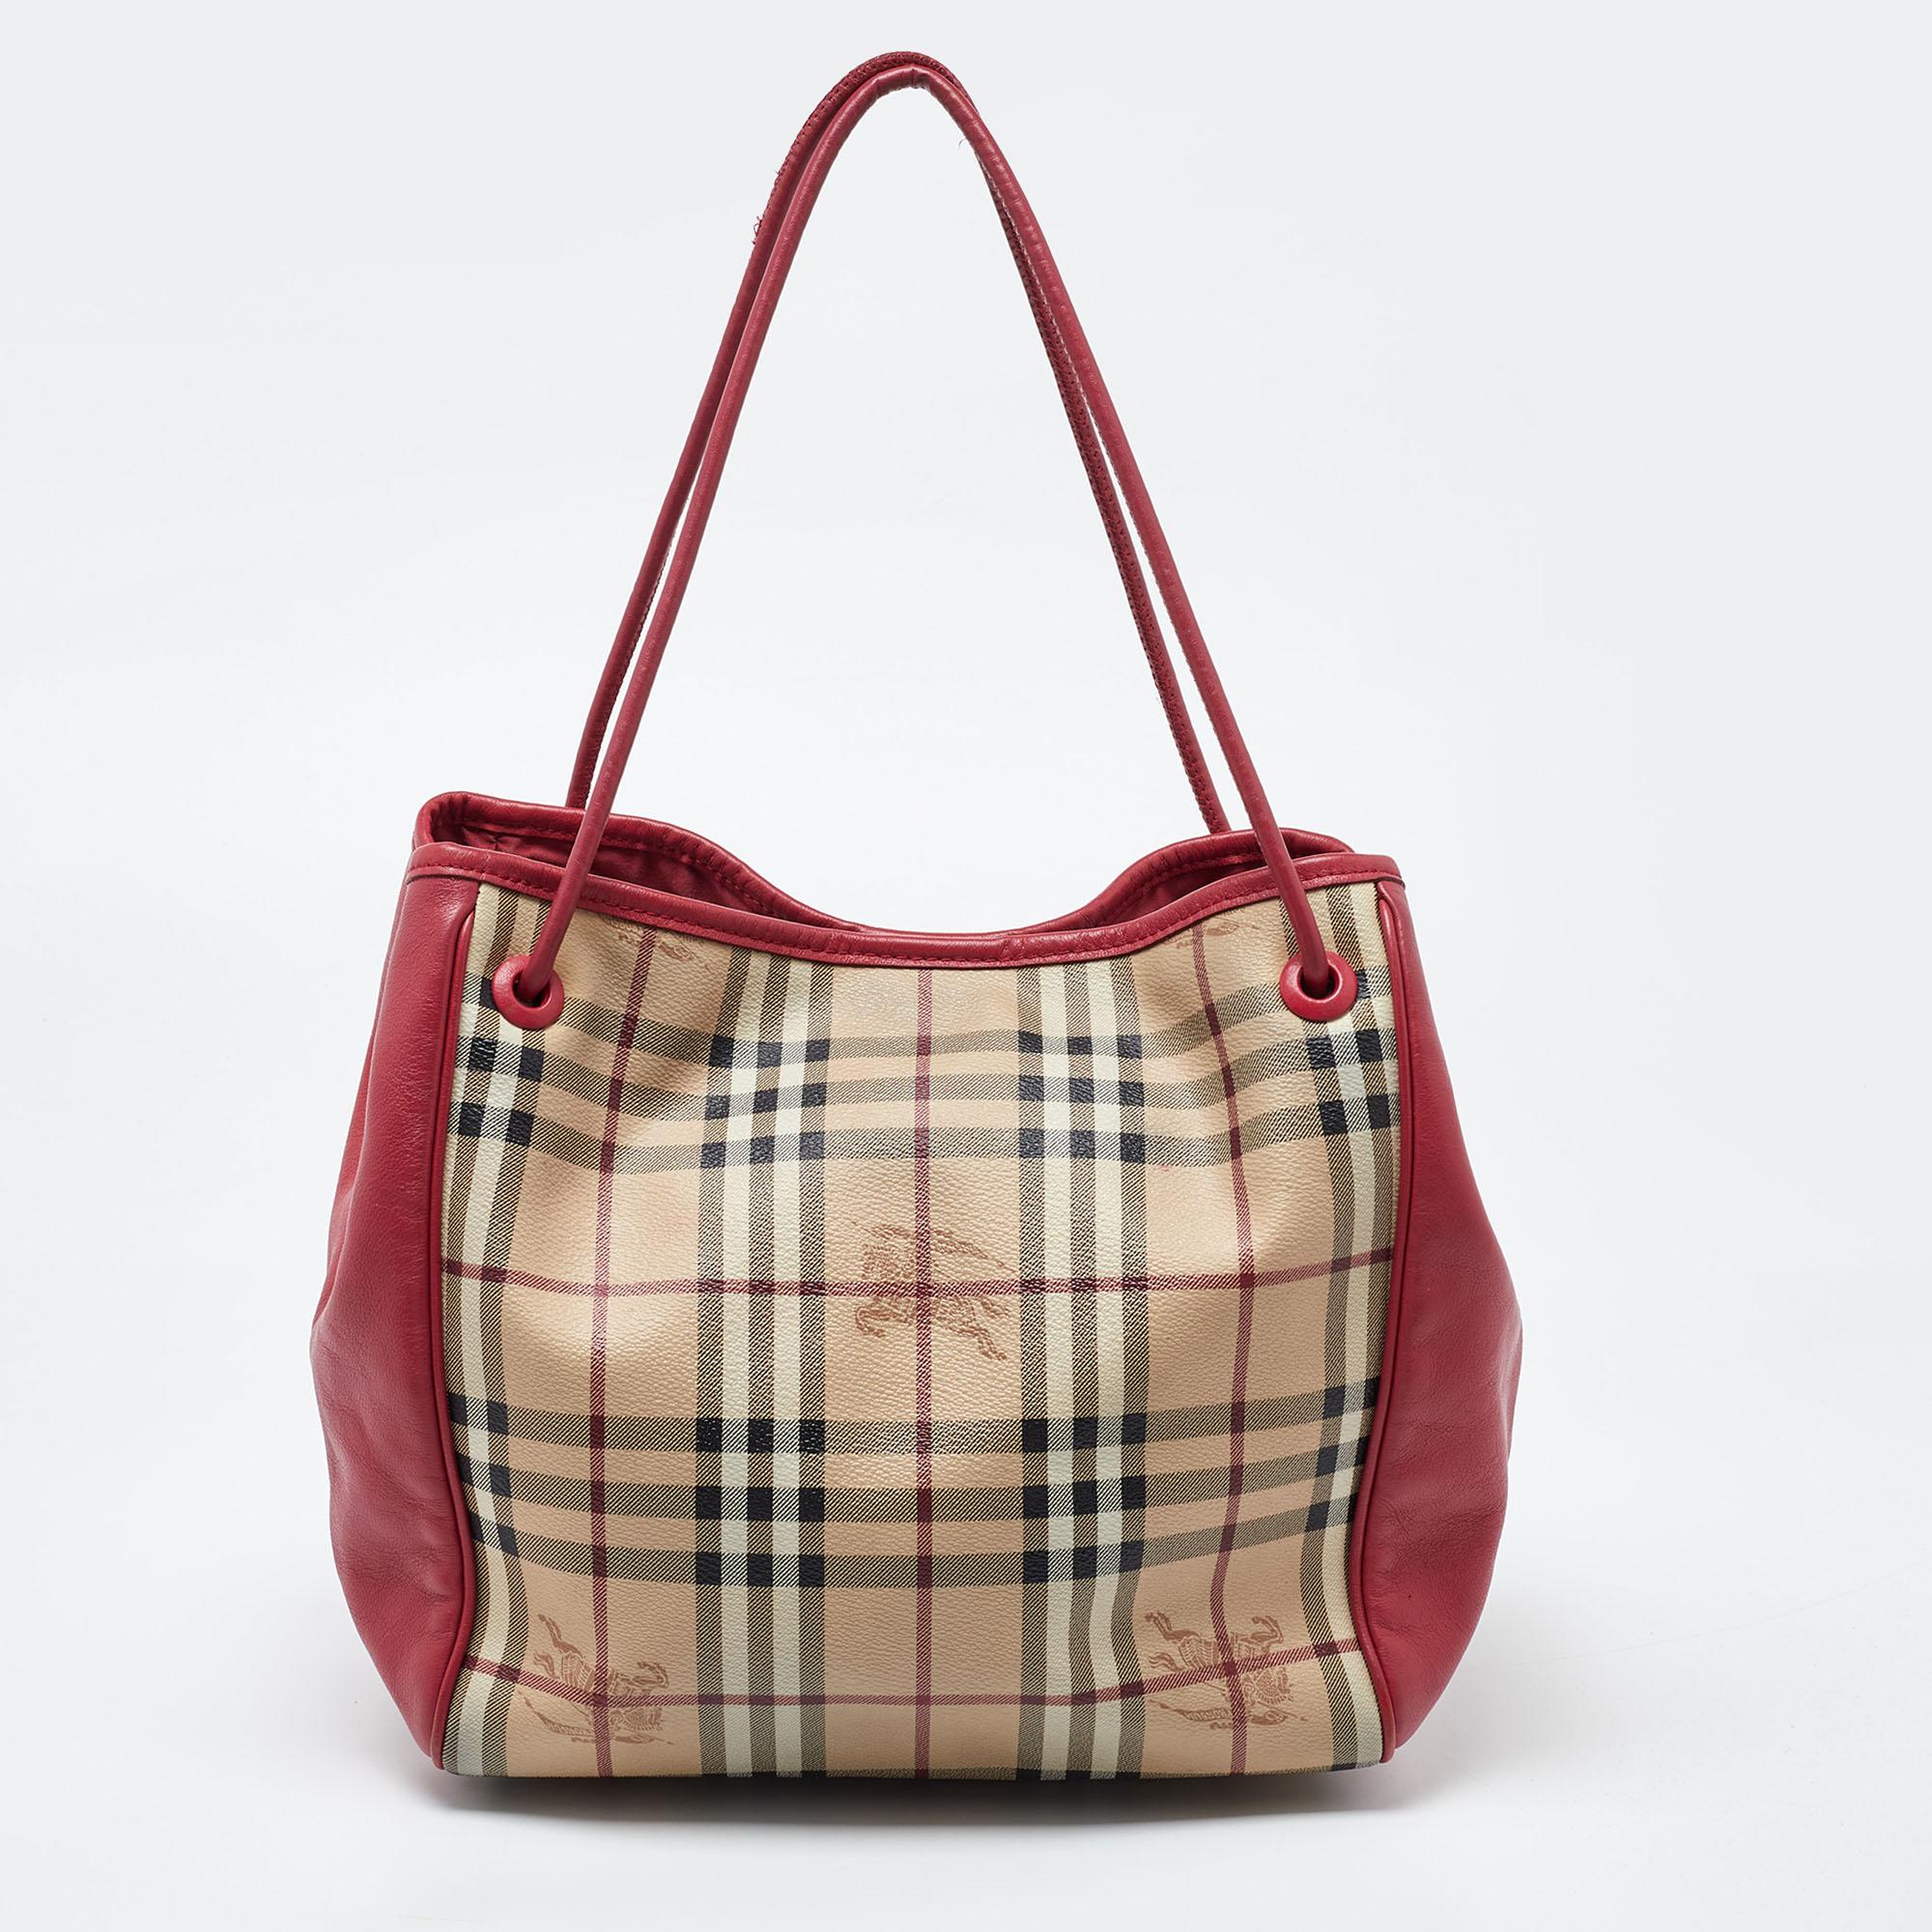 The Canterbury tote from Burberry will suffice your handbag needs with complete elegance. This tote is designed using beige-pink Haymarket Check coated canvas, leather, and gold-toned hardware. It is supported by dual handles and comes with a